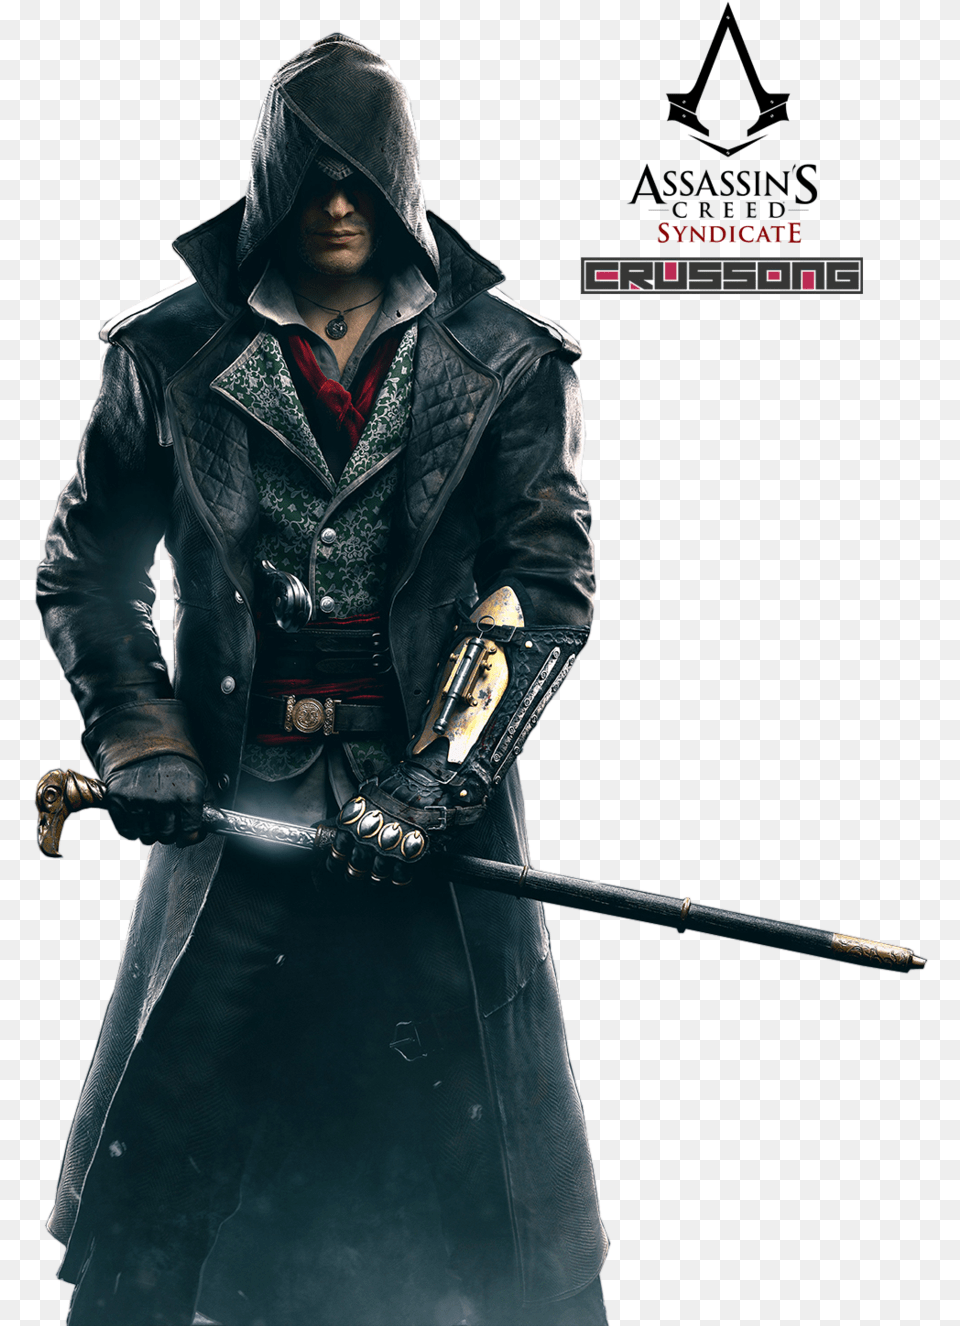 Assassin Creed Syndicate Image, Clothing, Coat, Jacket, Sword Png